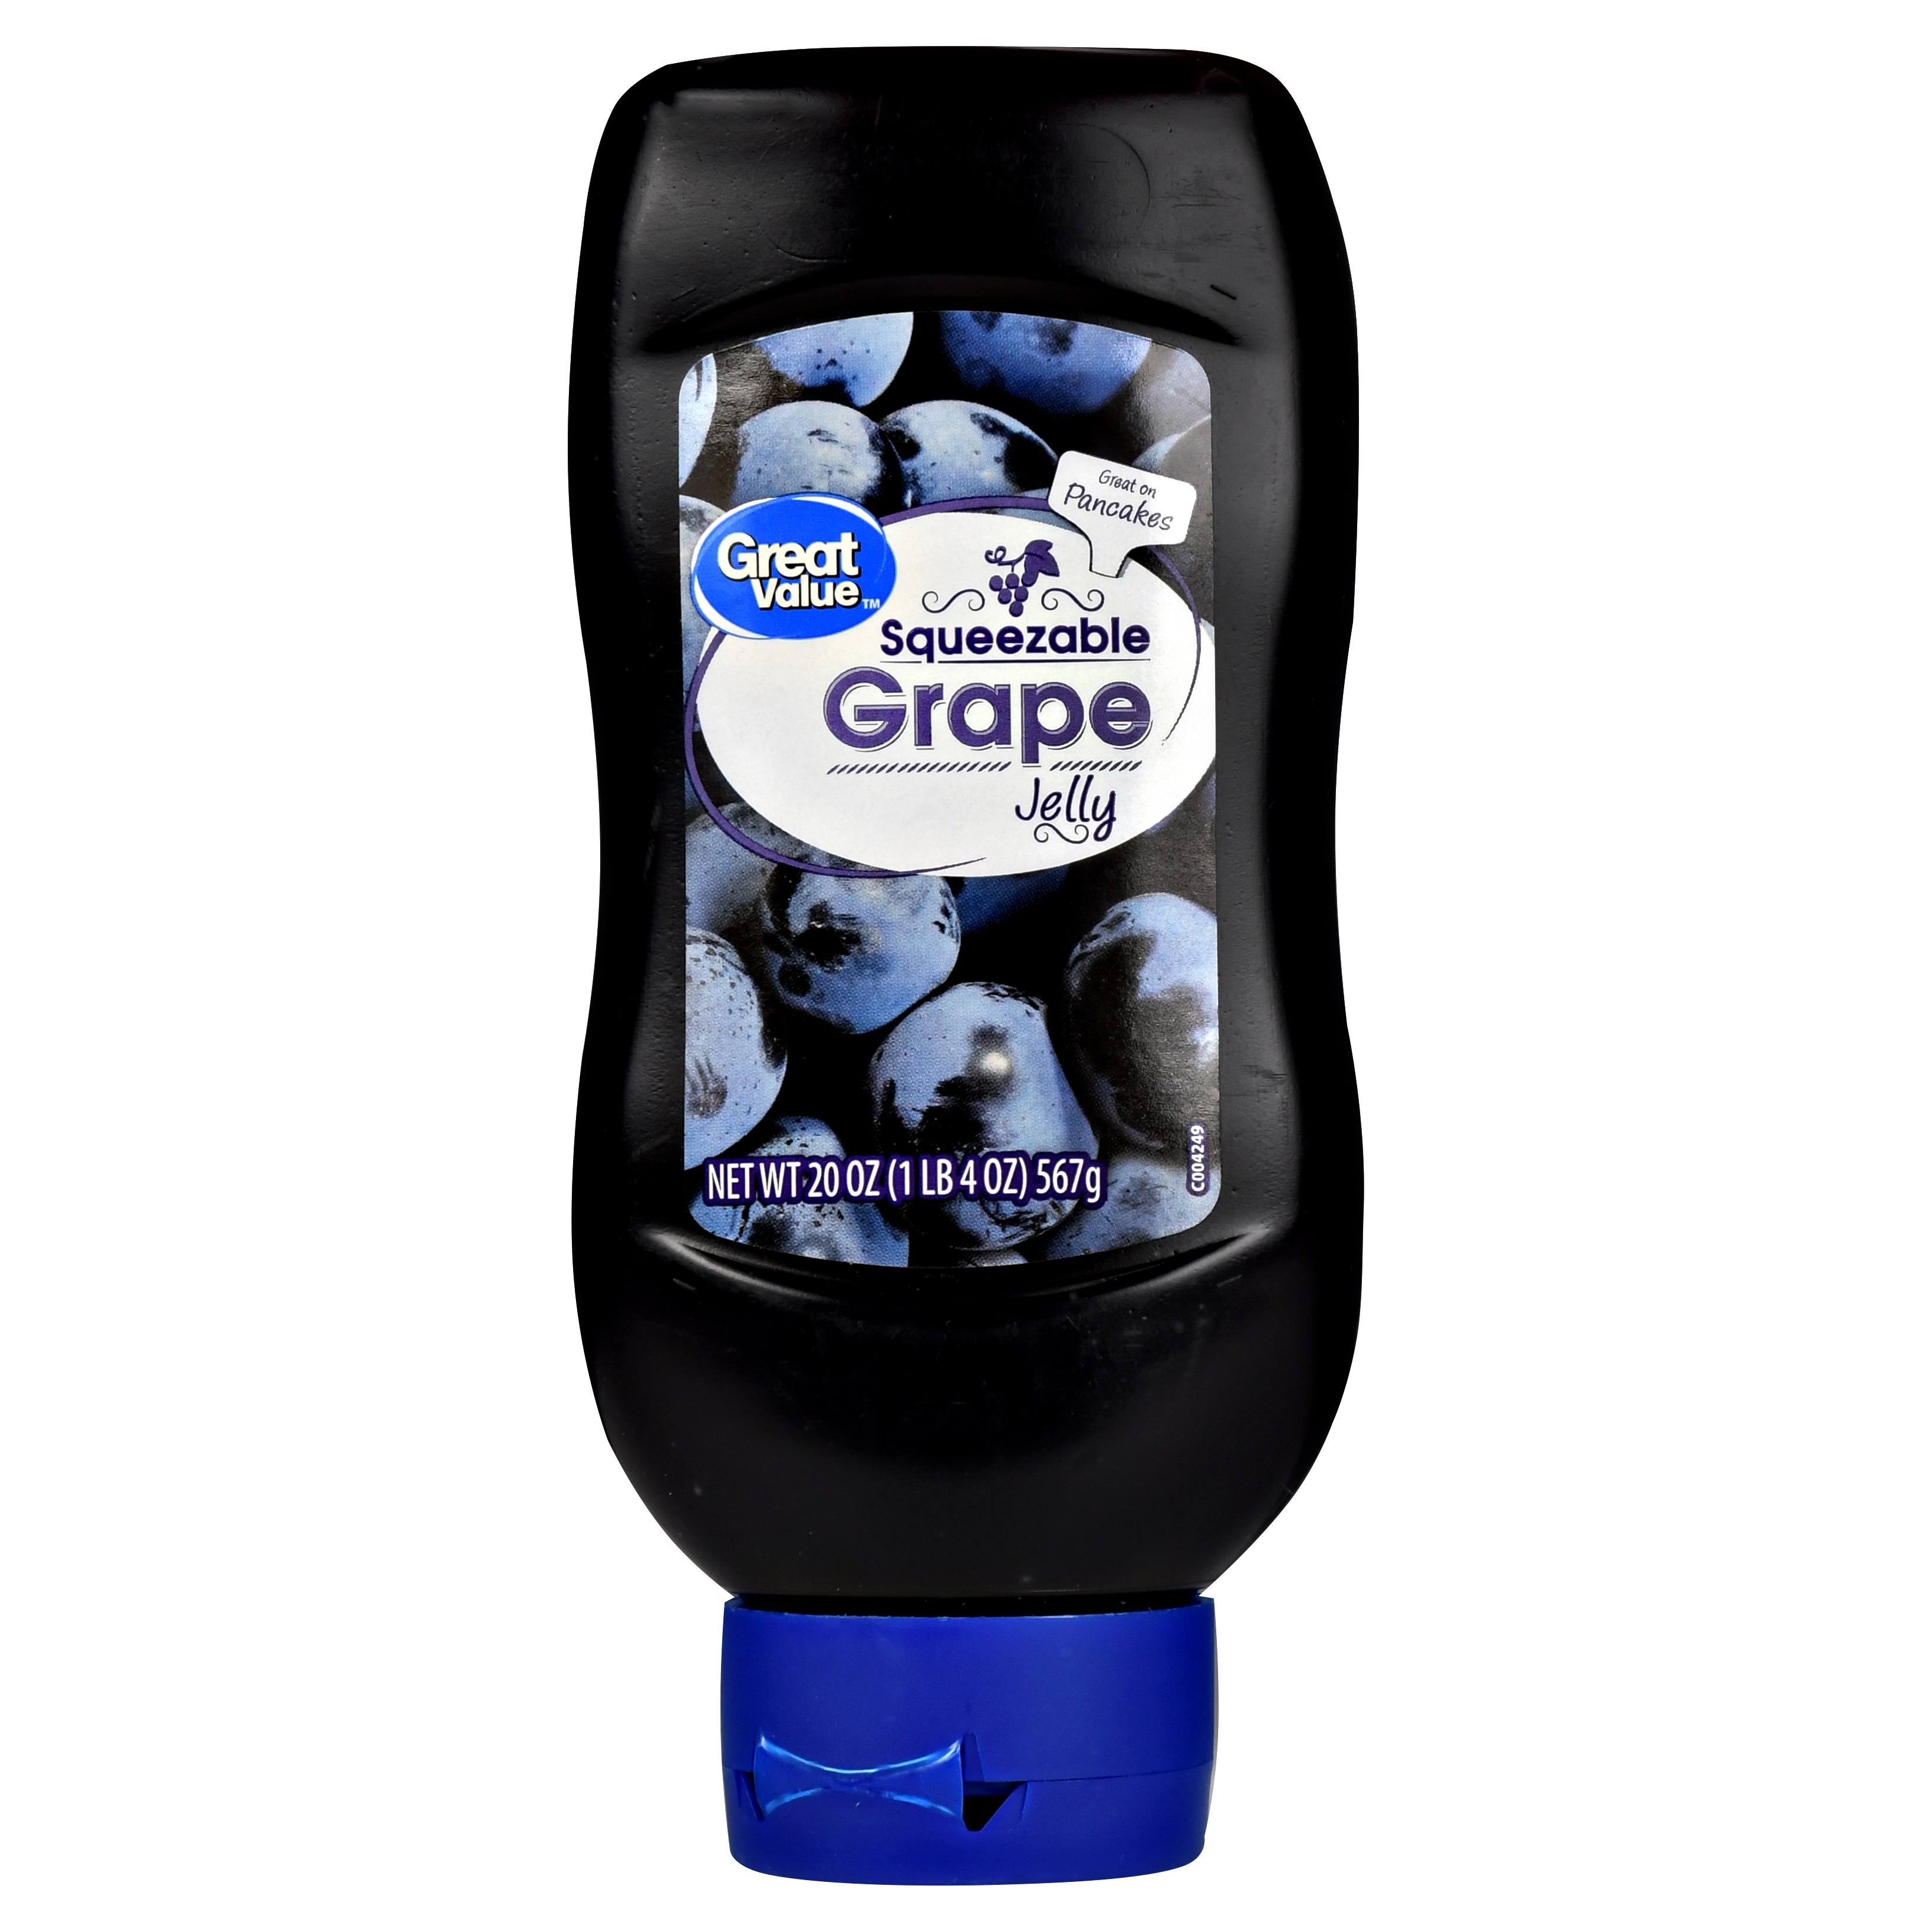 Great Value Squeezable Grape Jelly, 20 Oz